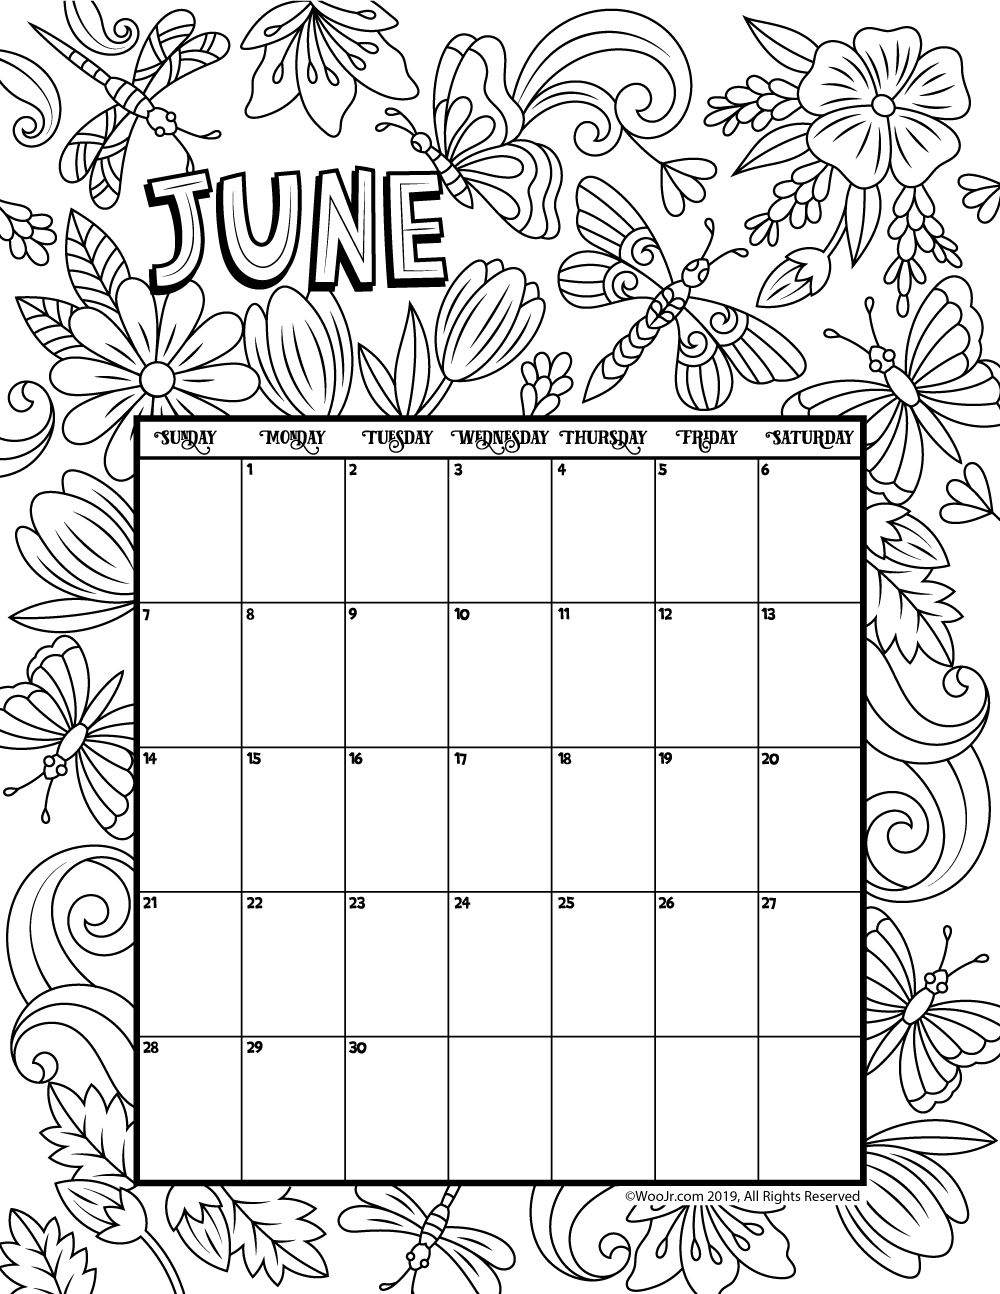 June 2020 Coloring Calendar In 2020 (With Images